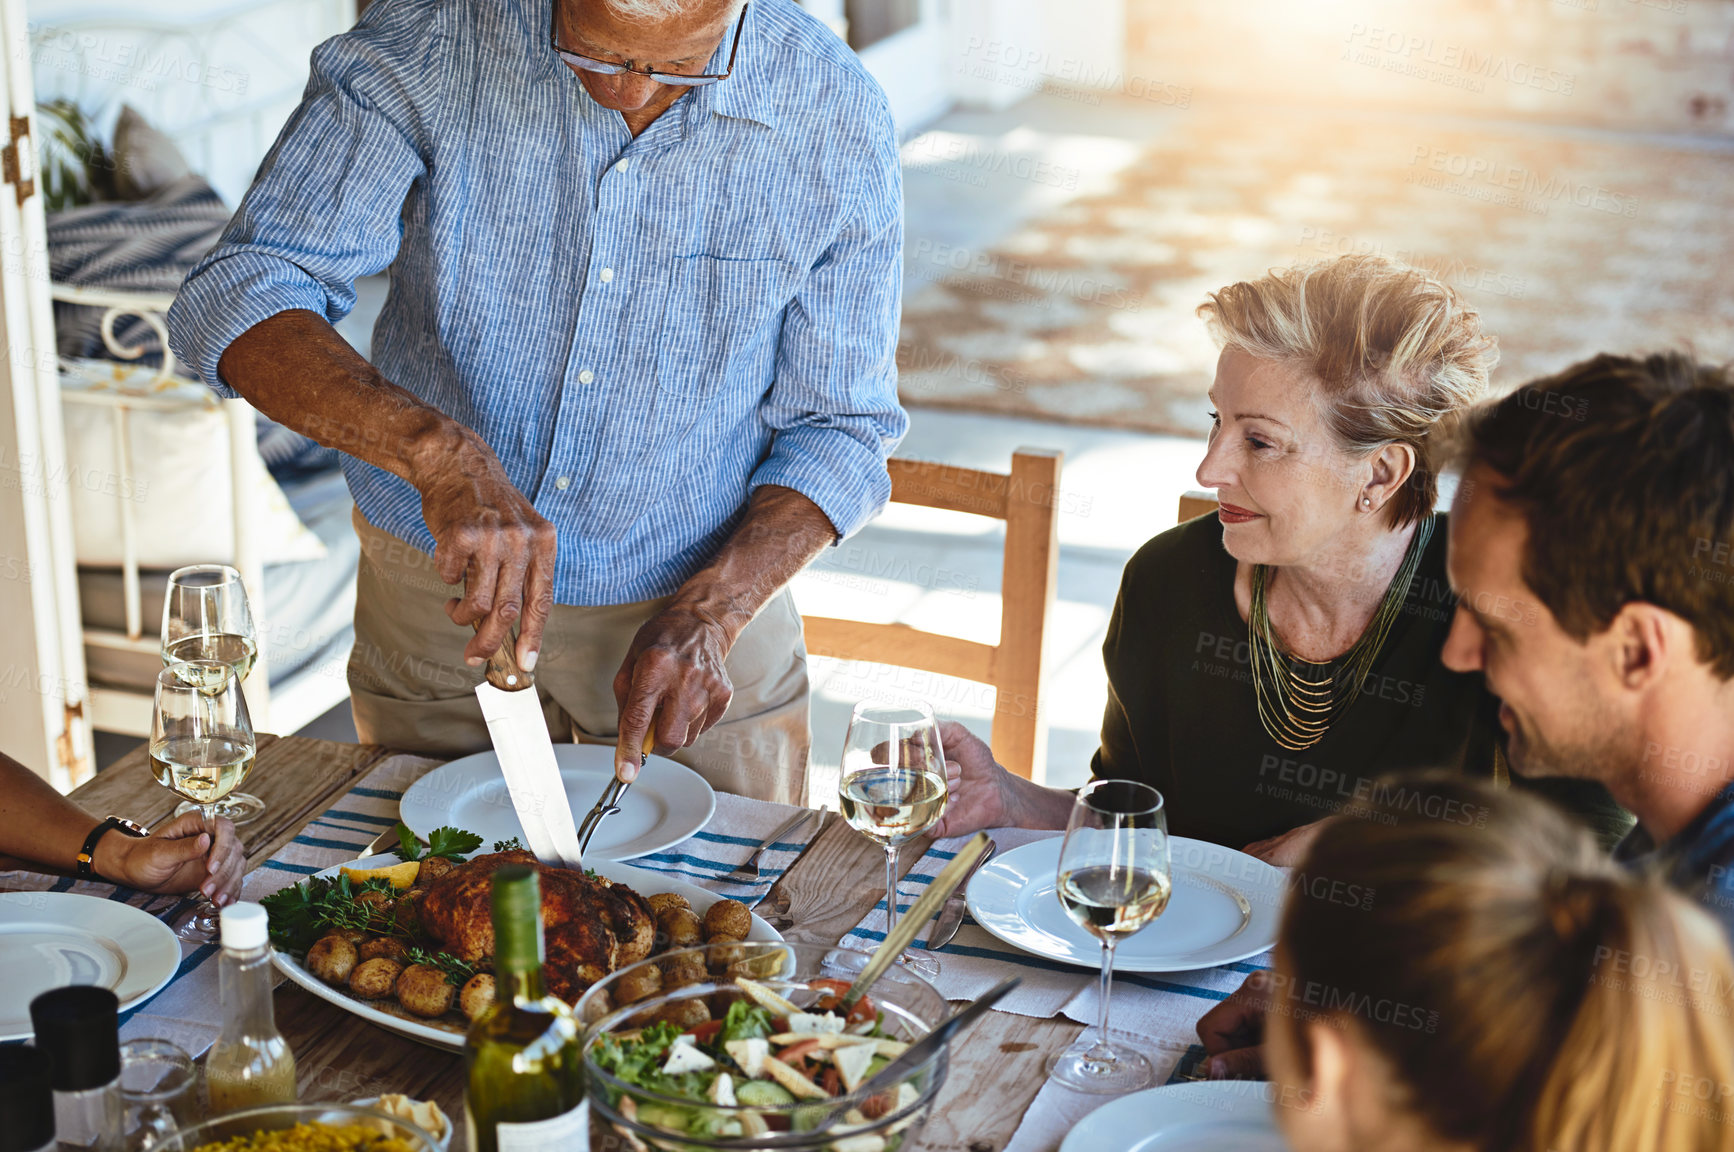 Buy stock photo Shot of a mature man carving a roast while enjoying lunch with his family outside